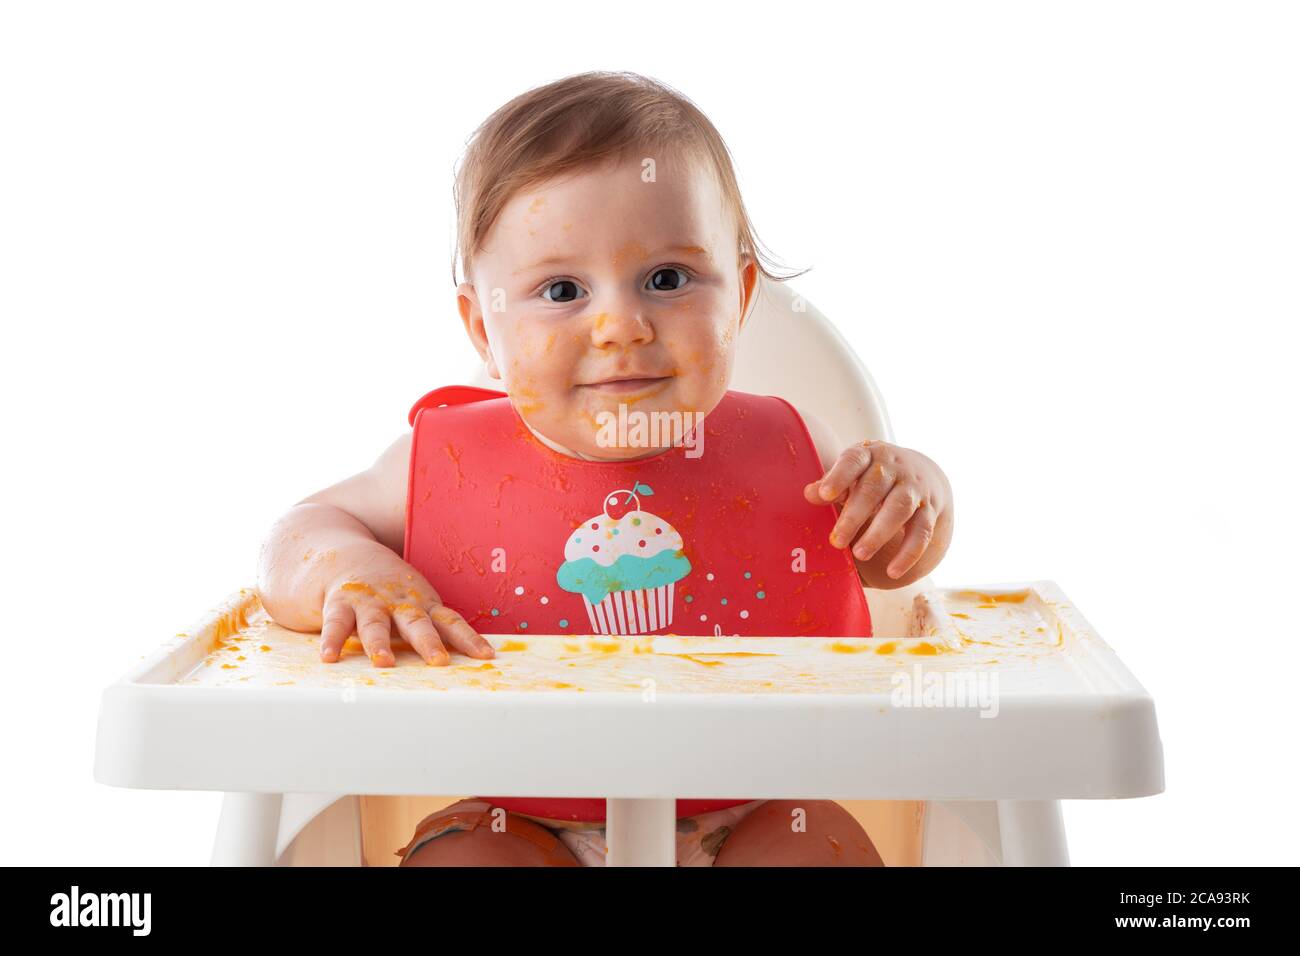 Cheerful baby child eats food itself with hands. Portrait of happy dirty kid boy in high chair and messy  around. Stock Photo